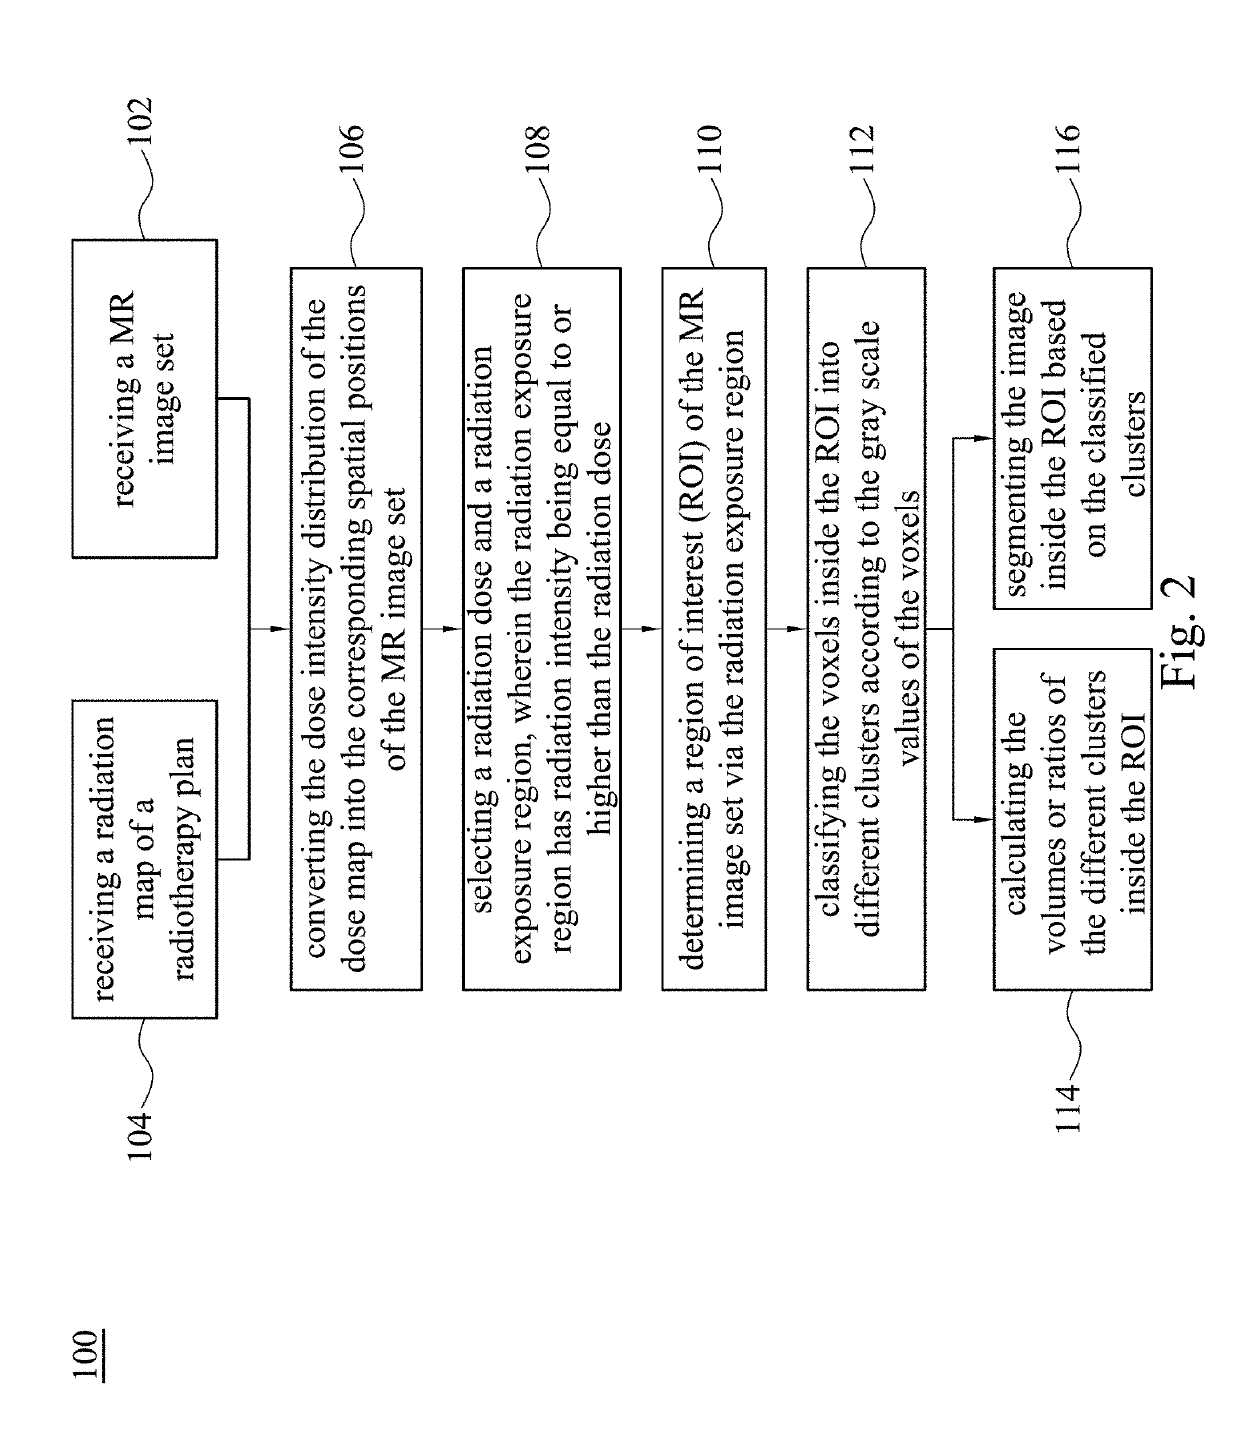 Magnetic resonance image analysis method and method for evaluating the risks of radiotherapy